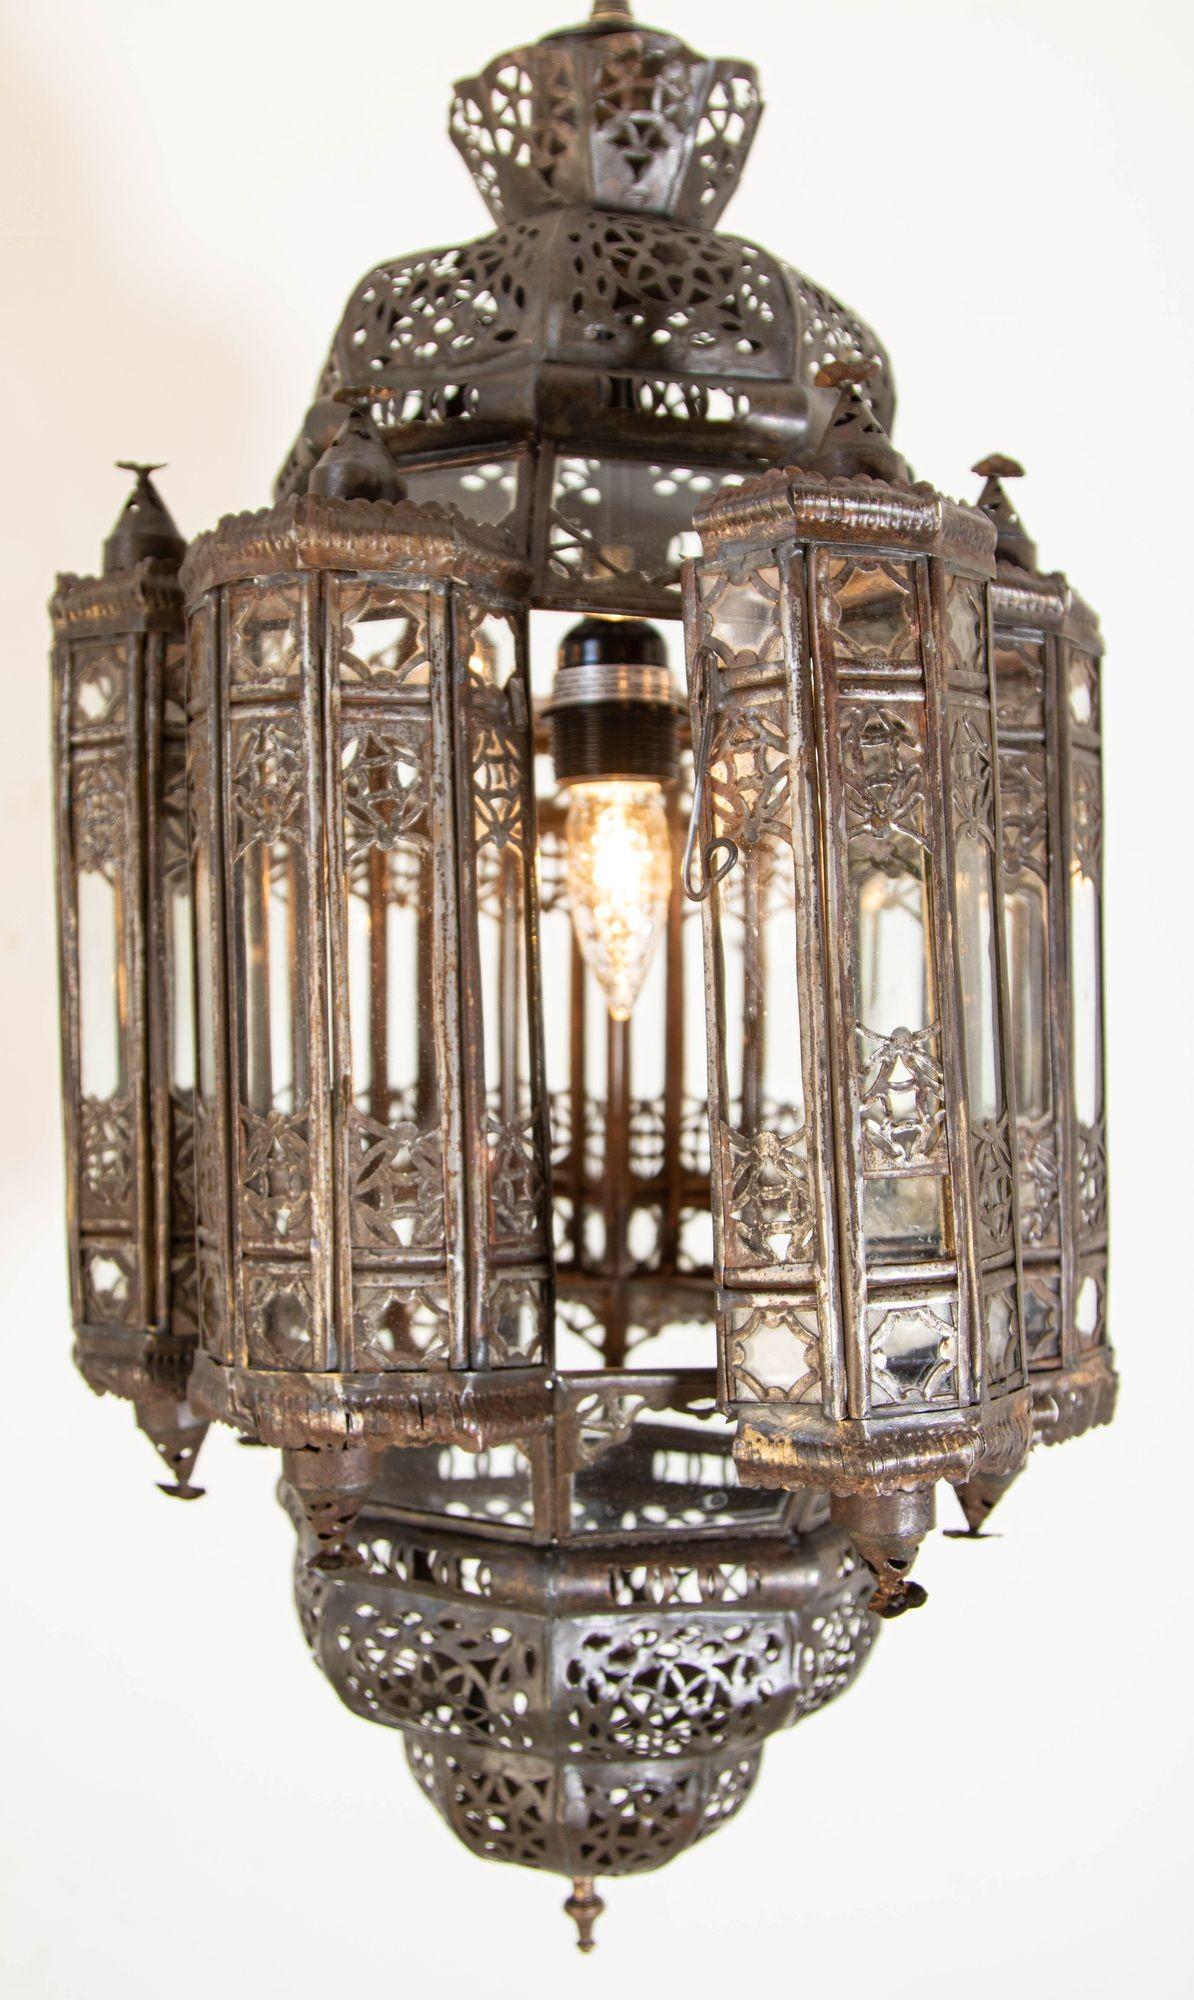 Vintage Moroccan Lantern Mamounia Clear Glass Hand-Crafted Ceiling Light Fixture For Sale 5